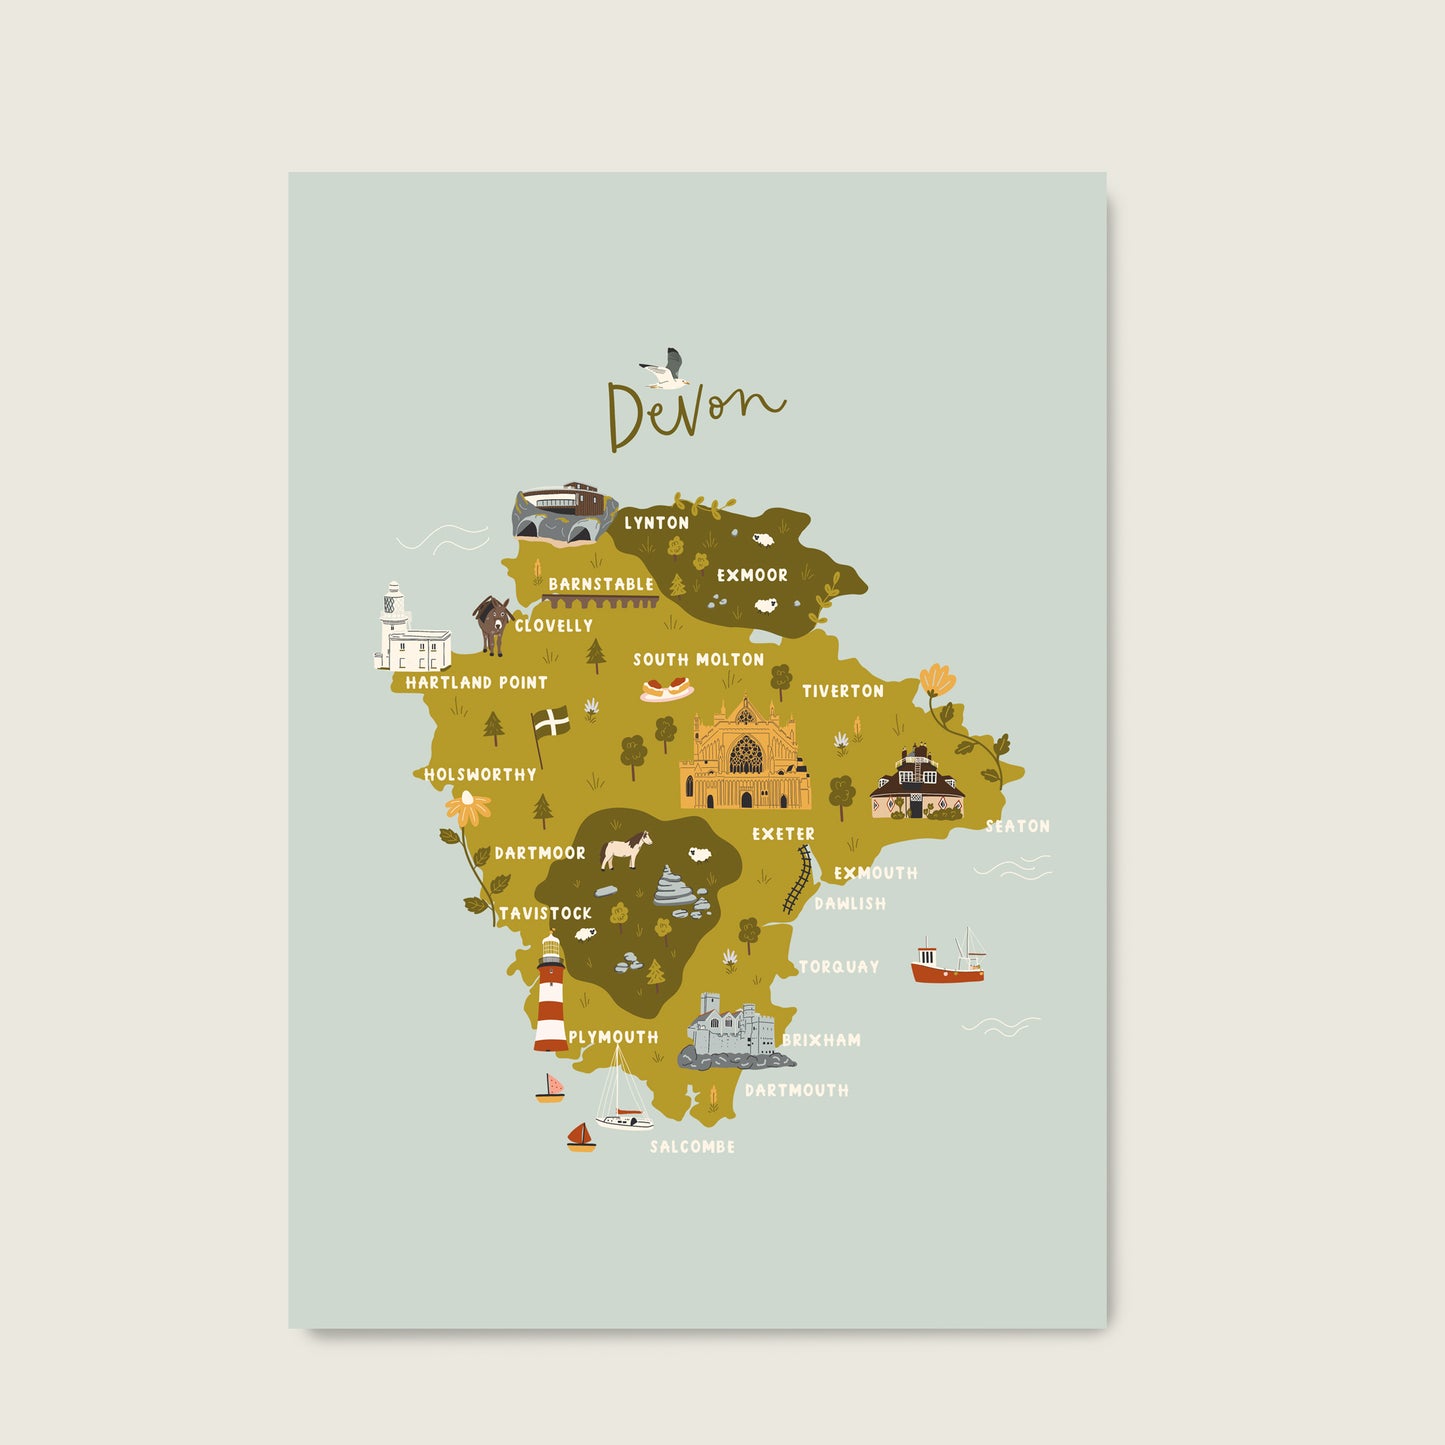 Illustrated map of Devon, featuring Plymouth, Dartmoor, Salcombe, Exeter, Exmoor and Clovelly, by Abbie Imagine